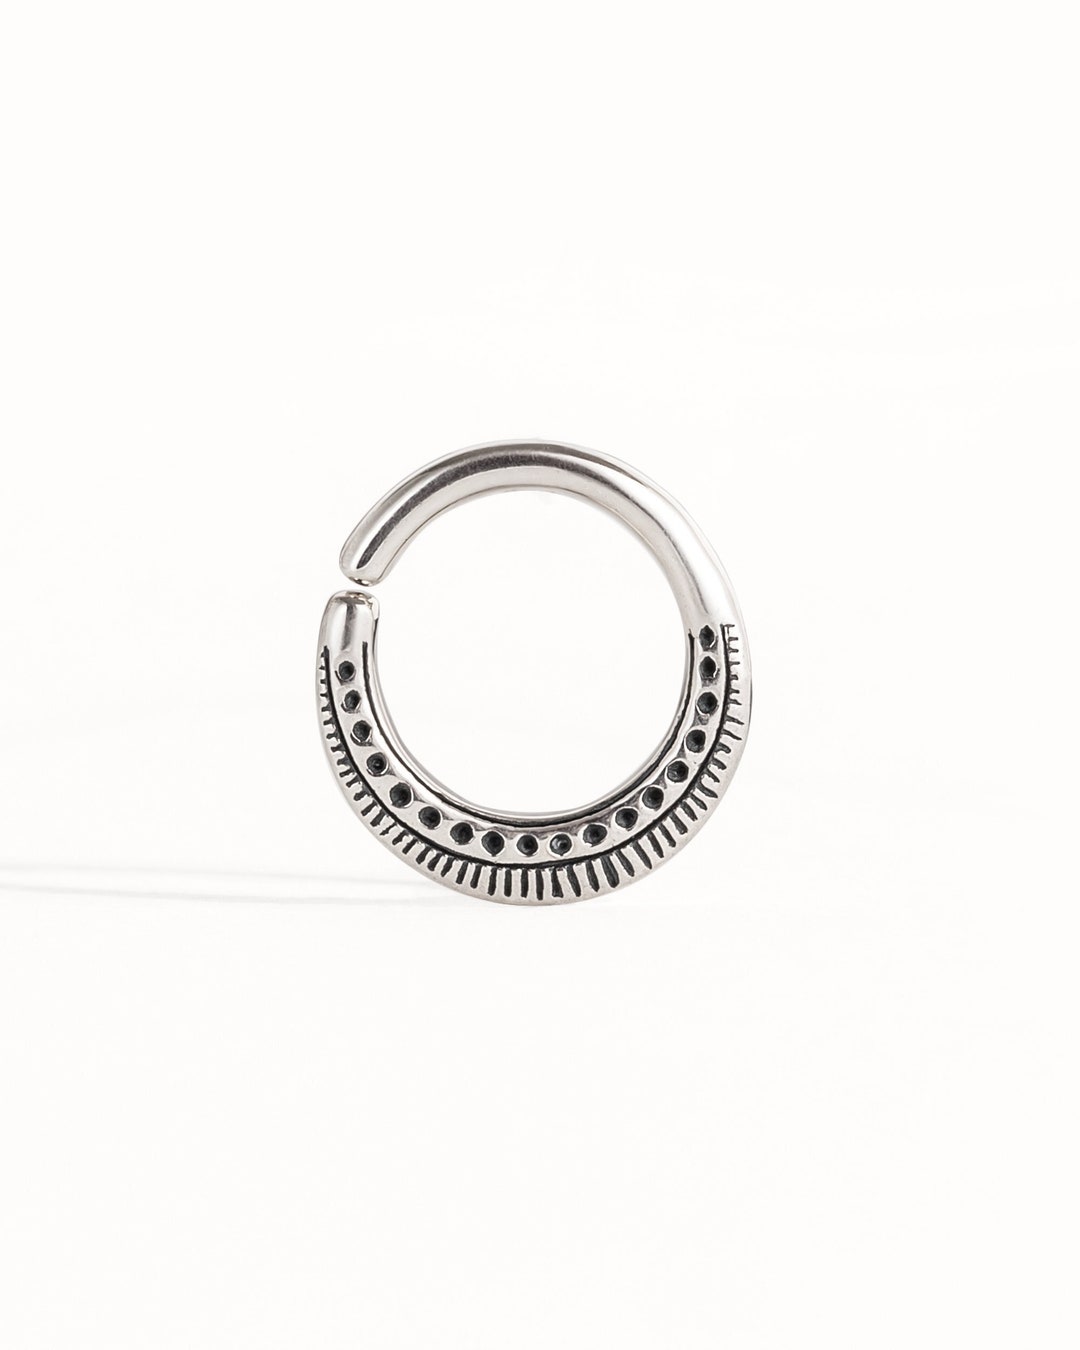 Septum Ring Nose Ring Body Jewelry Sterling Silver Bohemian Fashion ...